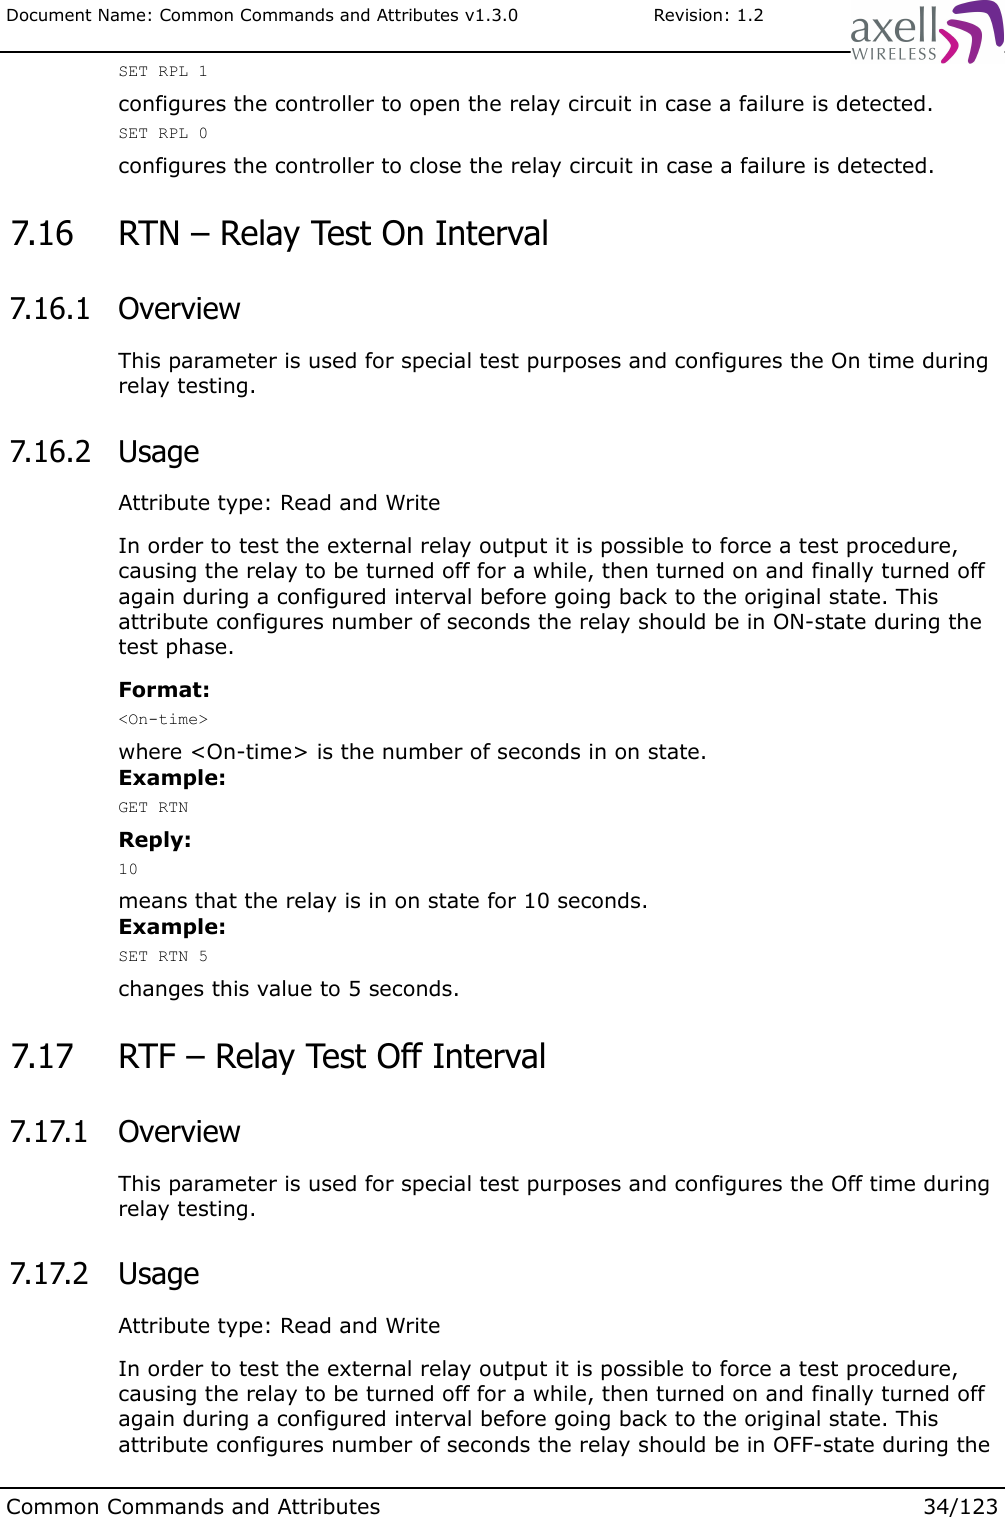 Document Name: Common Commands and Attributes v1.3.0                       Revision: 1.2SET RPL 1configures the controller to open the relay circuit in case a failure is detected.SET RPL 0configures the controller to close the relay circuit in case a failure is detected. 7.16  RTN – Relay Test On Interval  7.16.1  OverviewThis parameter is used for special test purposes and configures the On time during relay testing. 7.16.2  UsageAttribute type: Read and WriteIn order to test the external relay output it is possible to force a test procedure, causing the relay to be turned off for a while, then turned on and finally turned off again during a configured interval before going back to the original state. This attribute configures number of seconds the relay should be in ON-state during the test phase.Format:&lt;On-time&gt;where &lt;On-time&gt; is the number of seconds in on state.Example:GET RTNReply:10means that the relay is in on state for 10 seconds.Example:SET RTN 5changes this value to 5 seconds. 7.17  RTF – Relay Test Off Interval  7.17.1  OverviewThis parameter is used for special test purposes and configures the Off time during relay testing. 7.17.2  UsageAttribute type: Read and WriteIn order to test the external relay output it is possible to force a test procedure, causing the relay to be turned off for a while, then turned on and finally turned off again during a configured interval before going back to the original state. This attribute configures number of seconds the relay should be in OFF-state during the Common Commands and Attributes 34/123